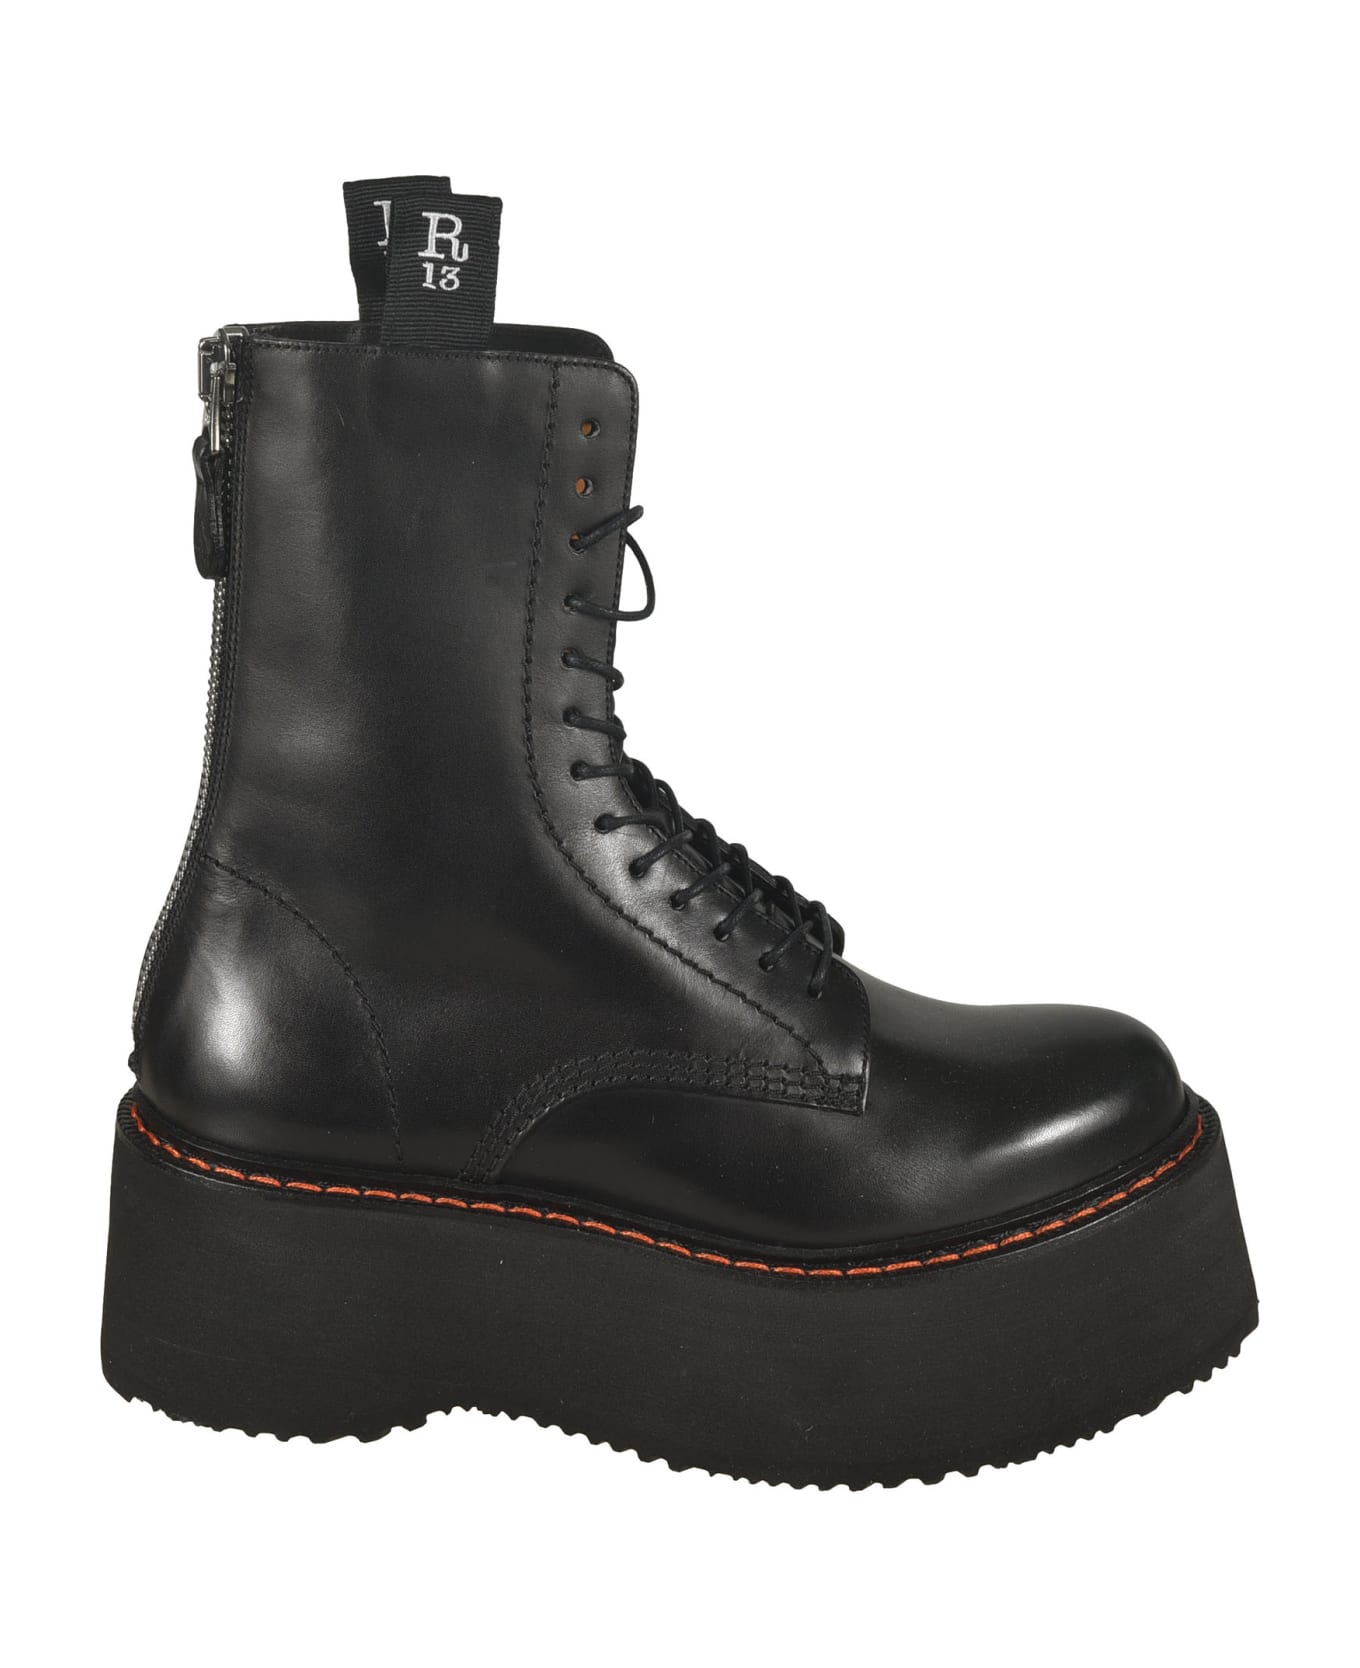 R13 X-stack Boots - Black ブーツ